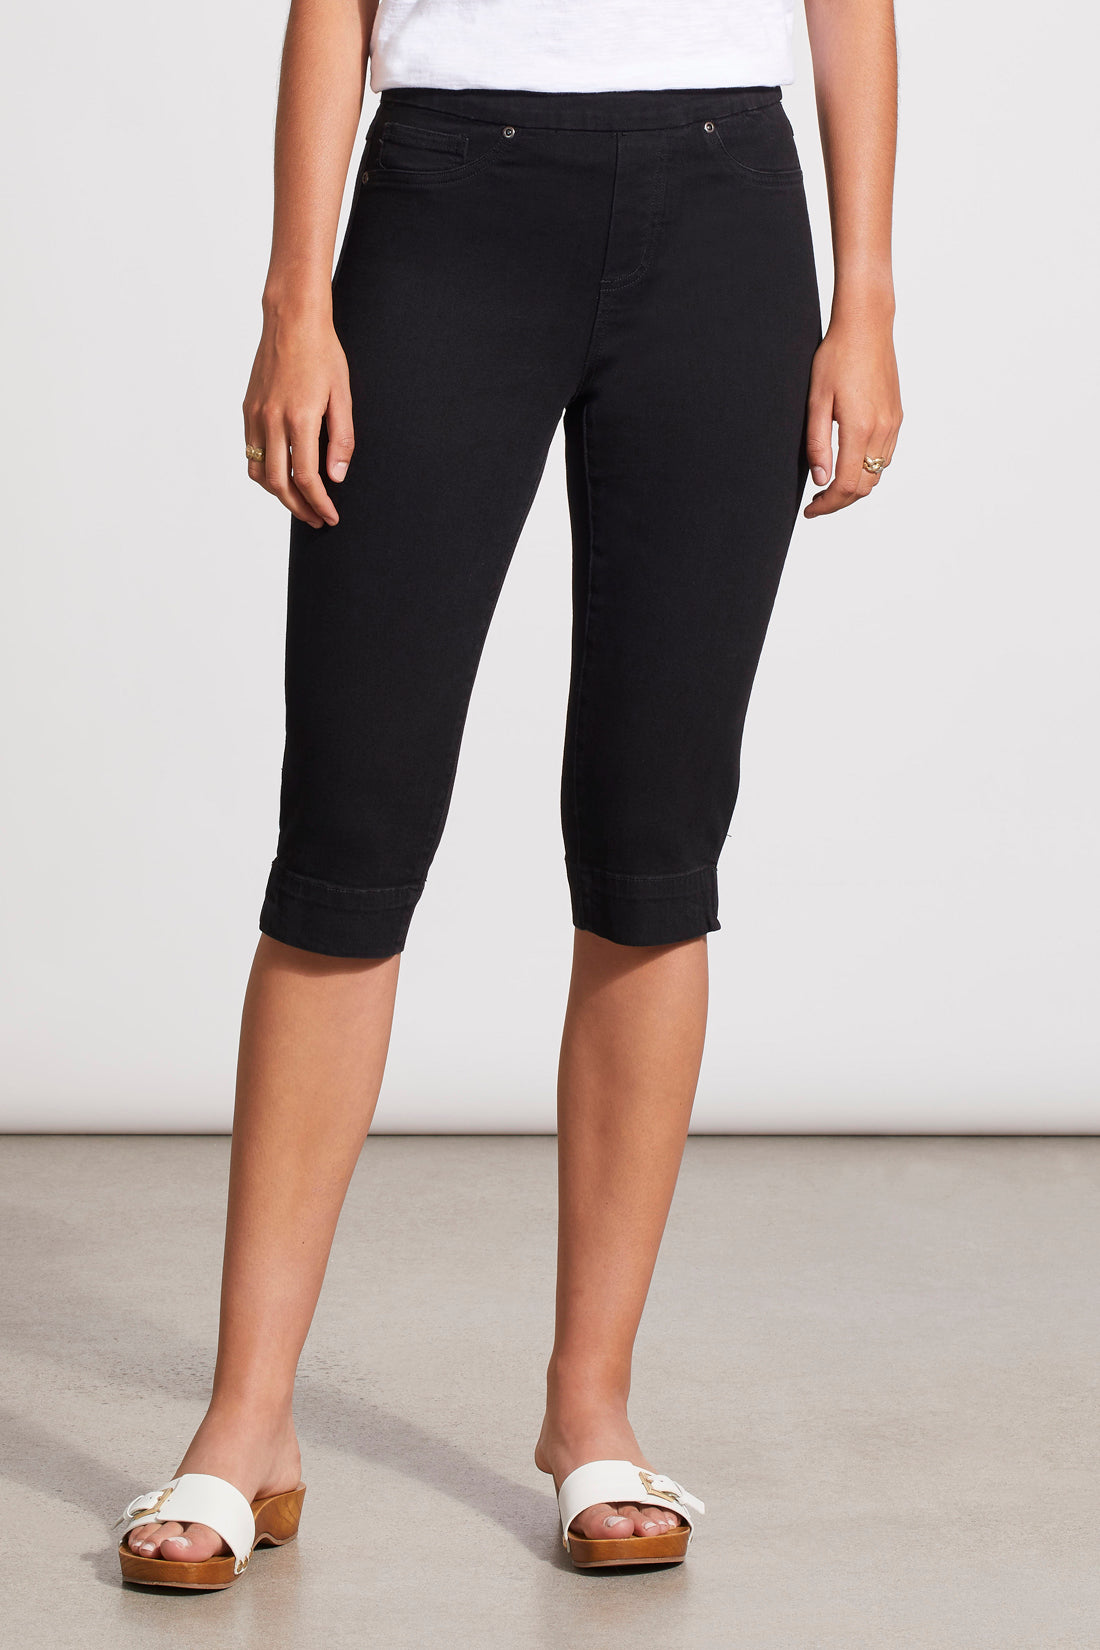 Tribal Audrey Pull On Capri Jeans W/ Side Slits Black 76740-2020-0002 – A  Passion for Fashion Inc.